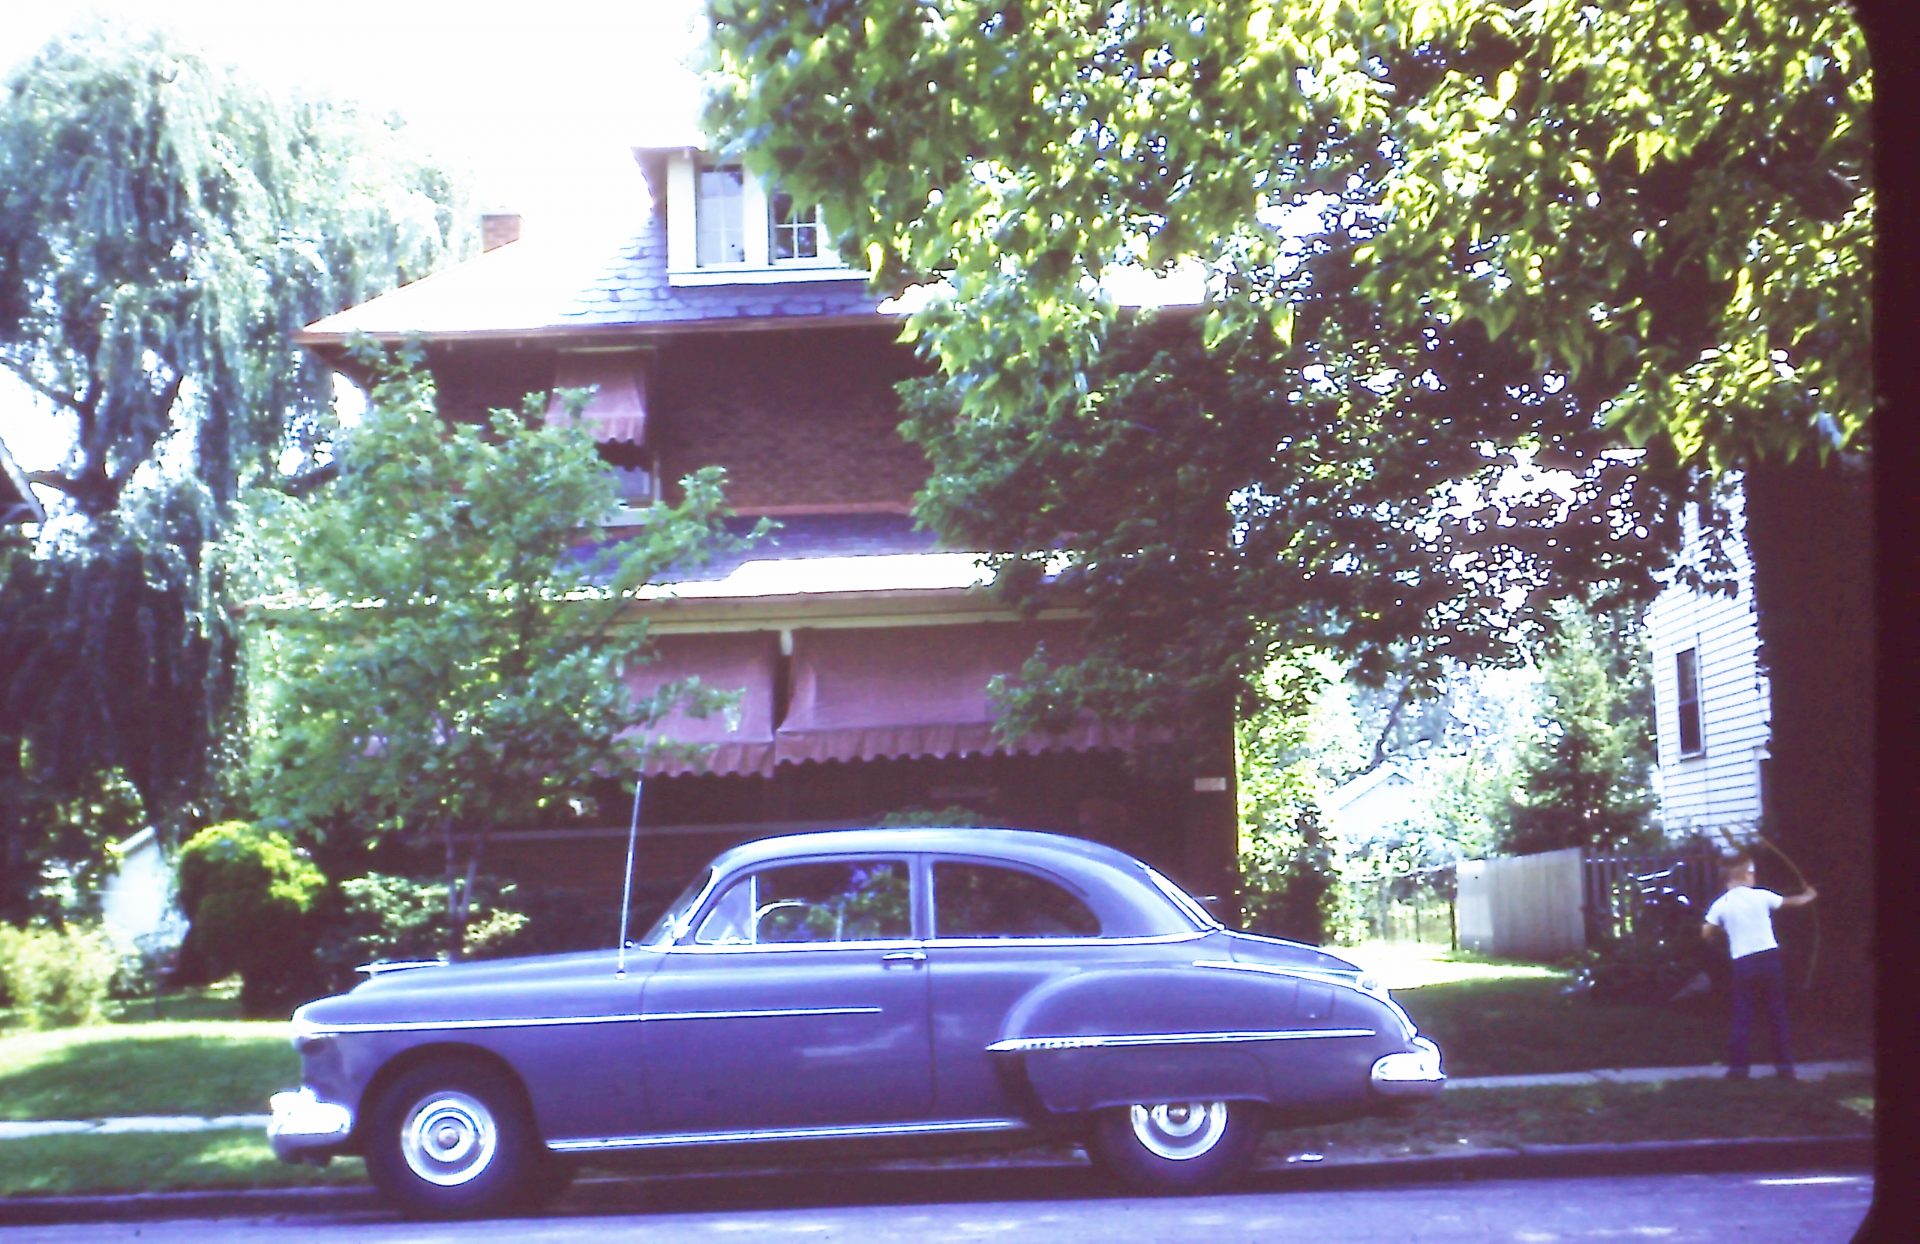 One of Dad's first cars.  Notice the kid playing with the Bow and Arrow, and the Burgess house!